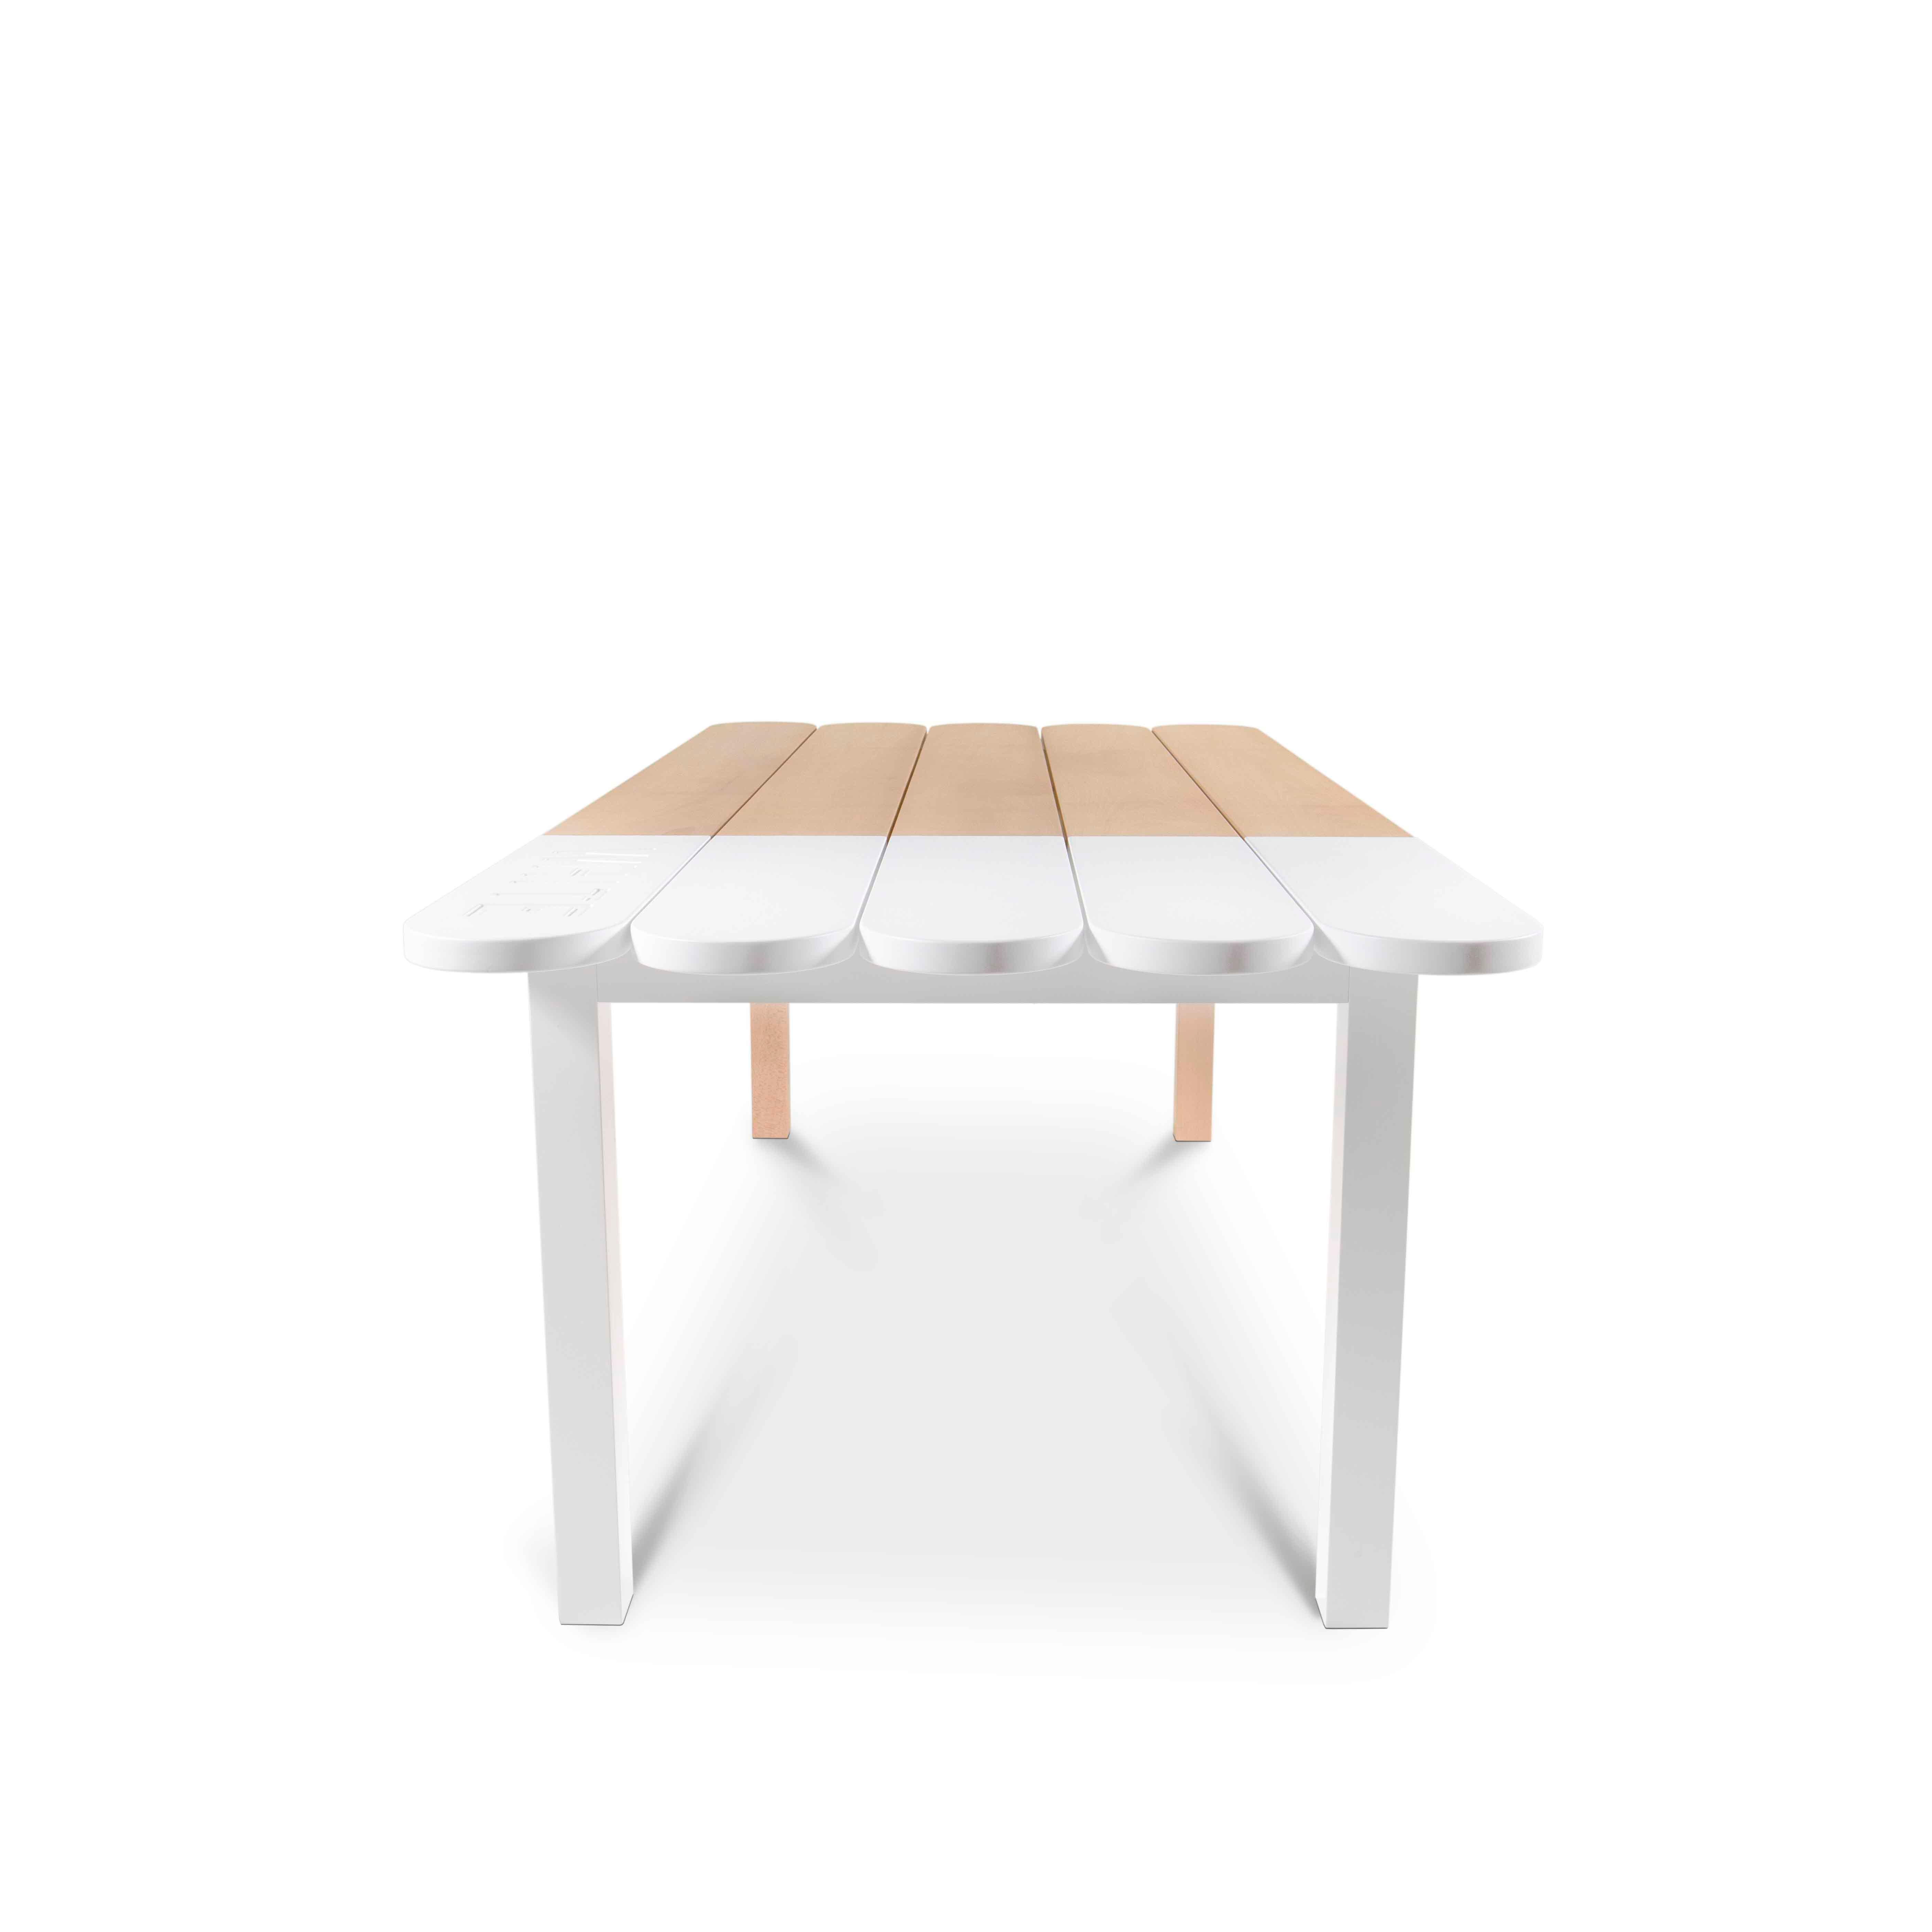 The Picolé dining table is inspired by the traditional ice cream sticks, present in any Brazilian beach and that follows a proposal of bare and Young Furniture for mixed indoor and outdoor areas.
Made in Faia, a natural Portuguese wood, the Picolé